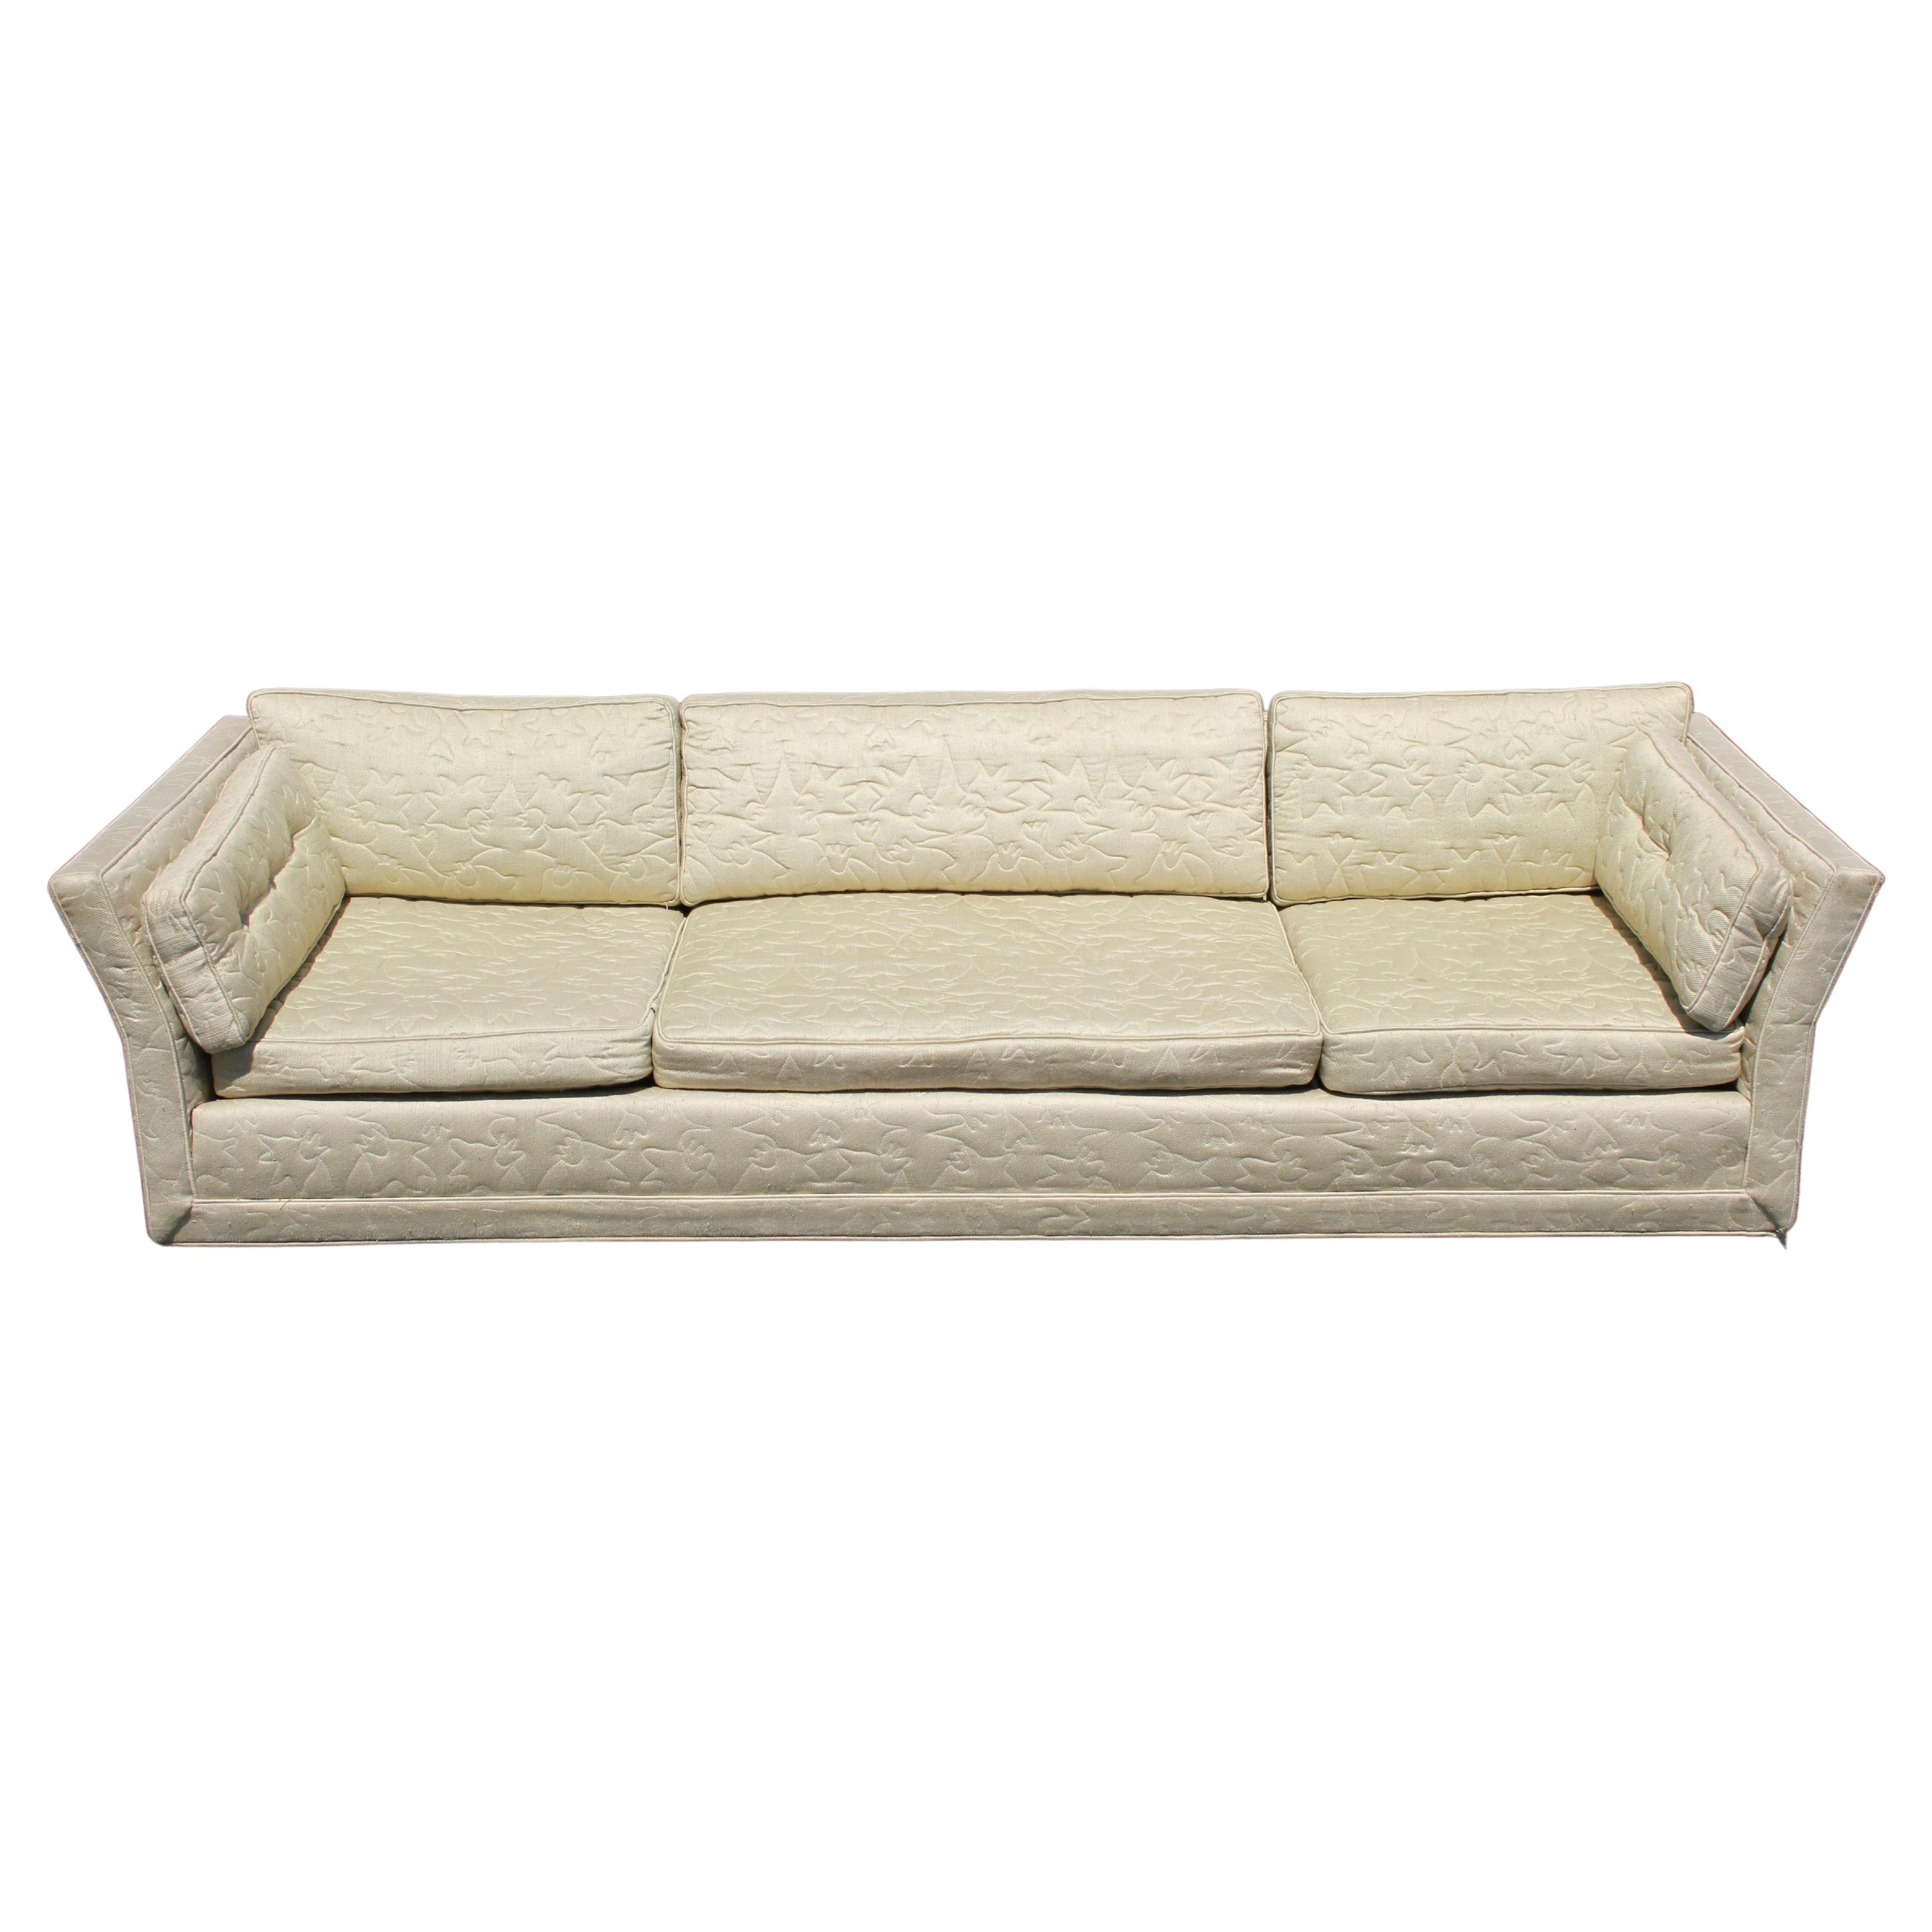 Large Mid-Century Modern Low Custom Sofa by Flair Inc on Brass Castors, Project